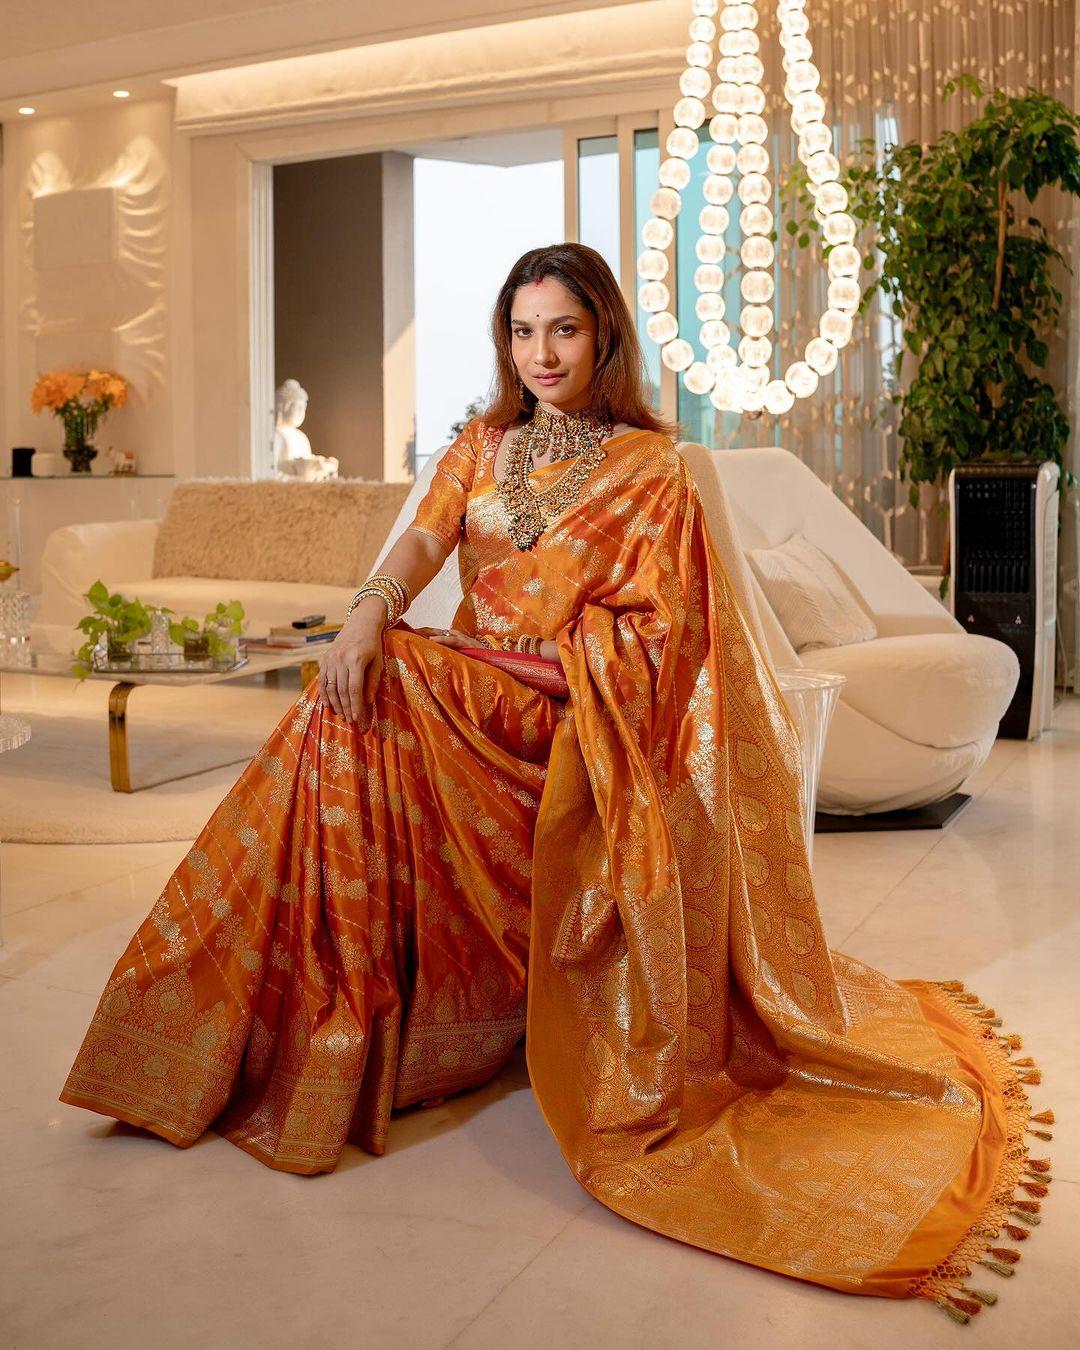 No doubt Ankita Lokhande has a knack for ethnic fashion. The Pavitra Rishta fame never disappoints her fans when it comes to giving perfect inspiration for a saree look